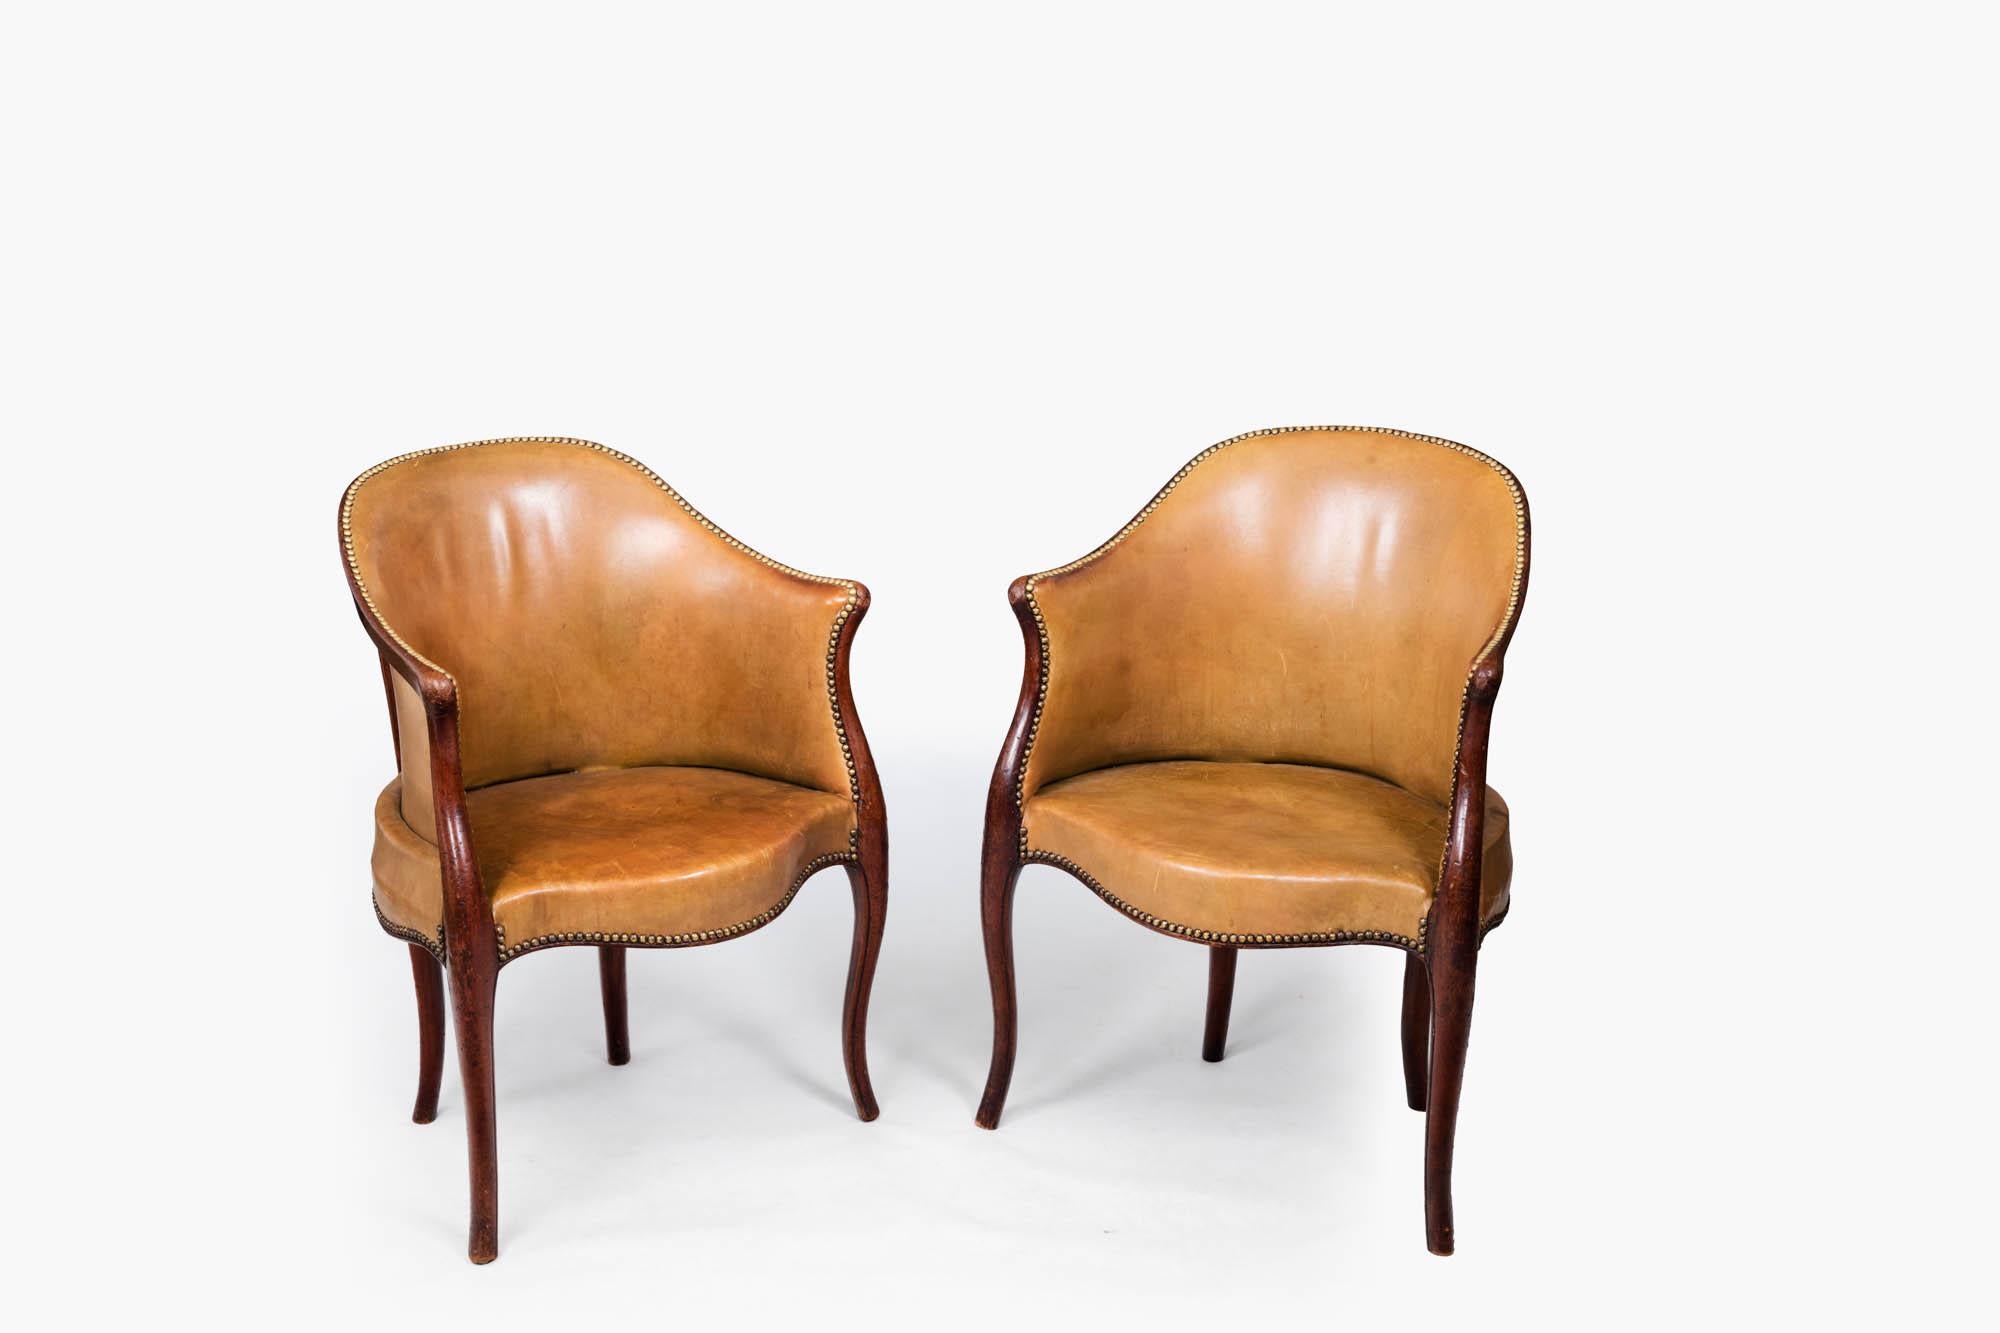 Late 18th Century pair of tub library armchairs, of carved Durmast Oak, in the Hepplewhite style. This fine pair of Georgian library chairs upholstered in a tanned leather hide are accented with brass nailhead trims. The moulded show-wood frames are